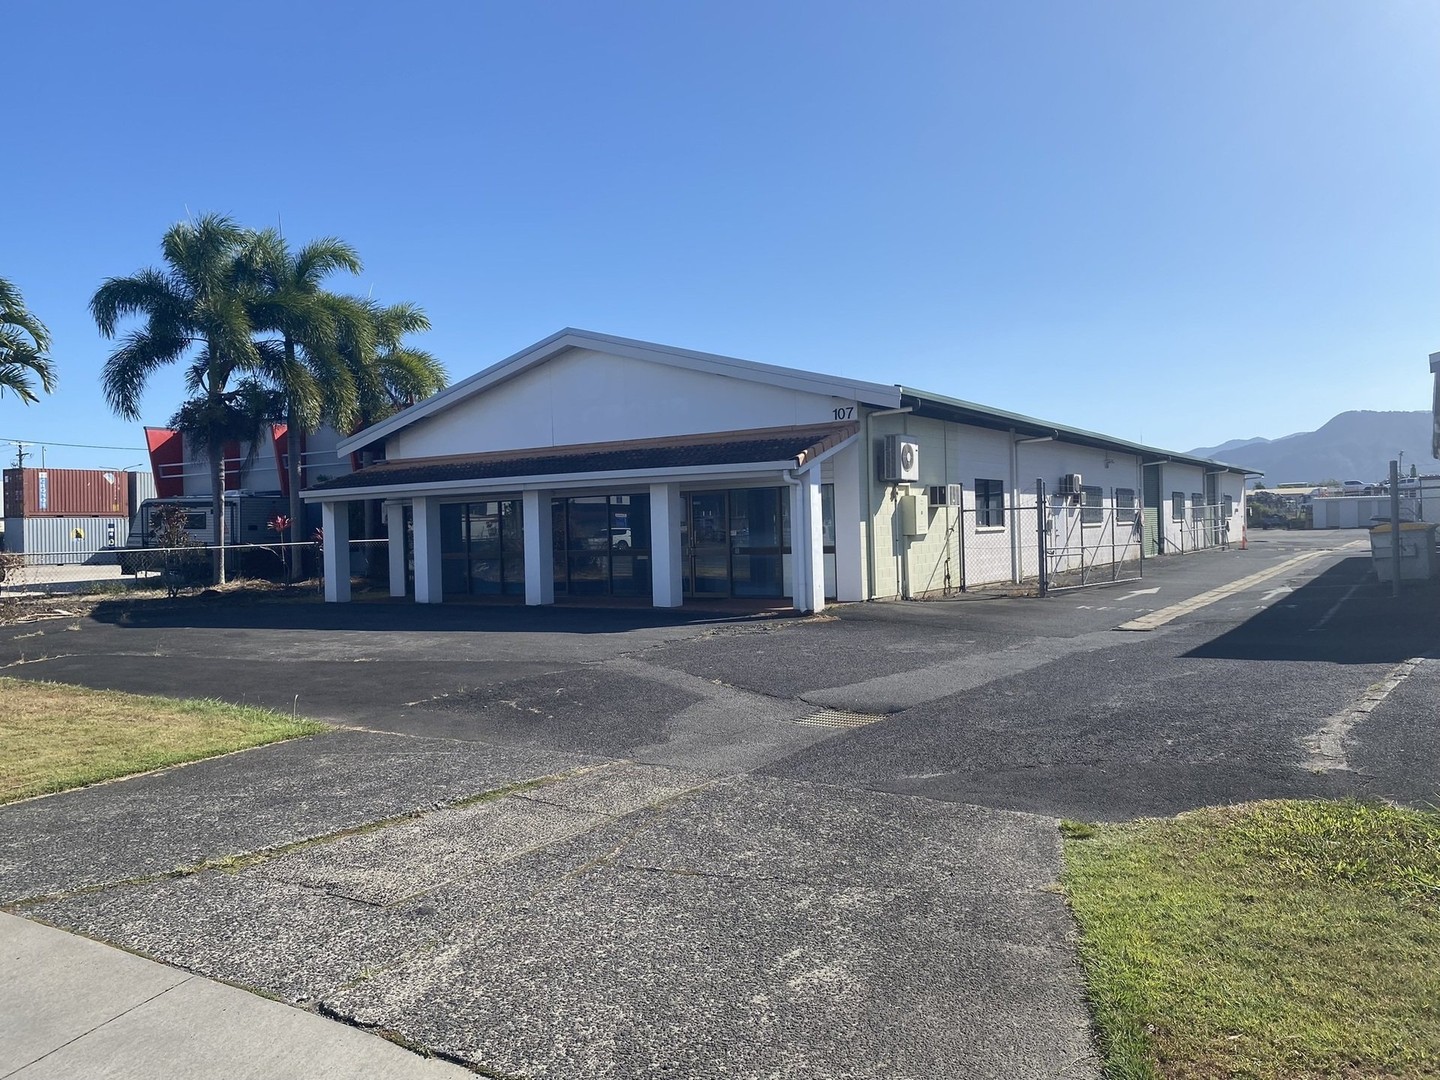 107-109 Draper Street, Portsmith QLD 4870 - Leased Factory, Warehouse ...